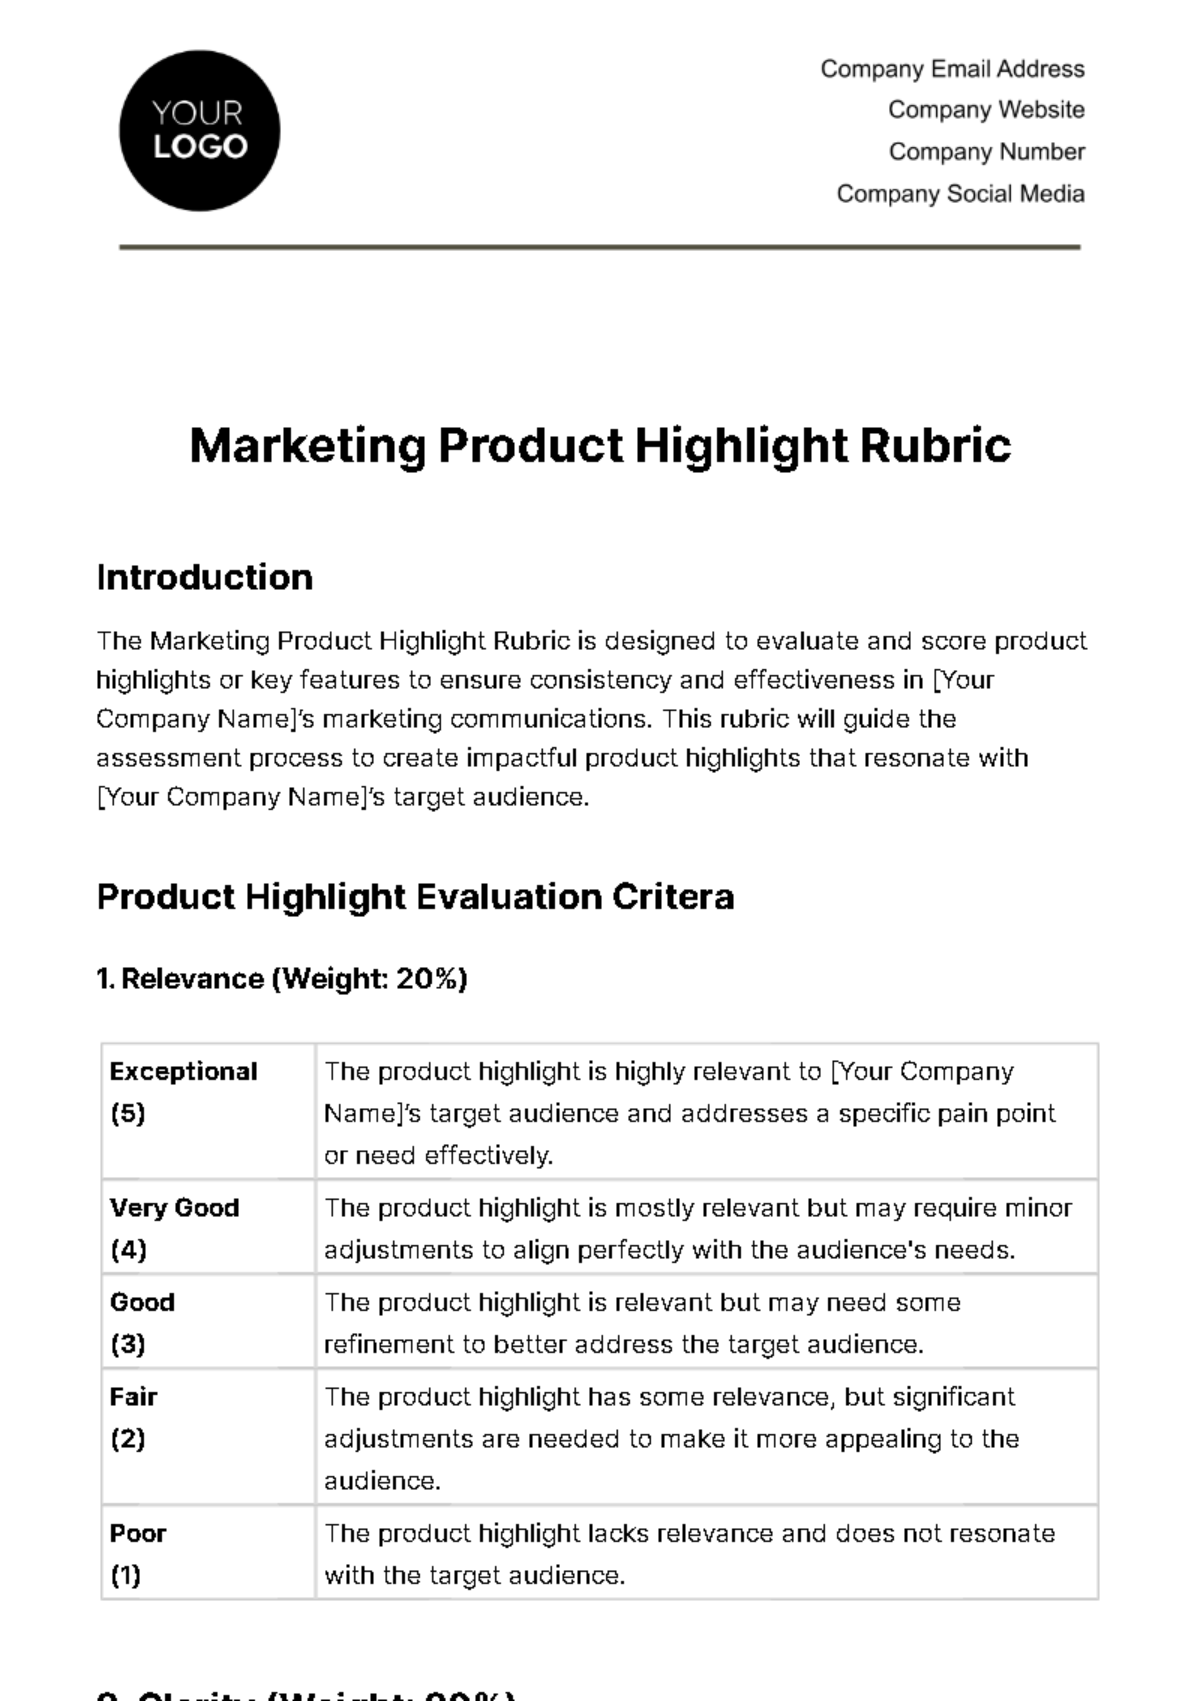 Free Marketing Product Highlight Rubric Template